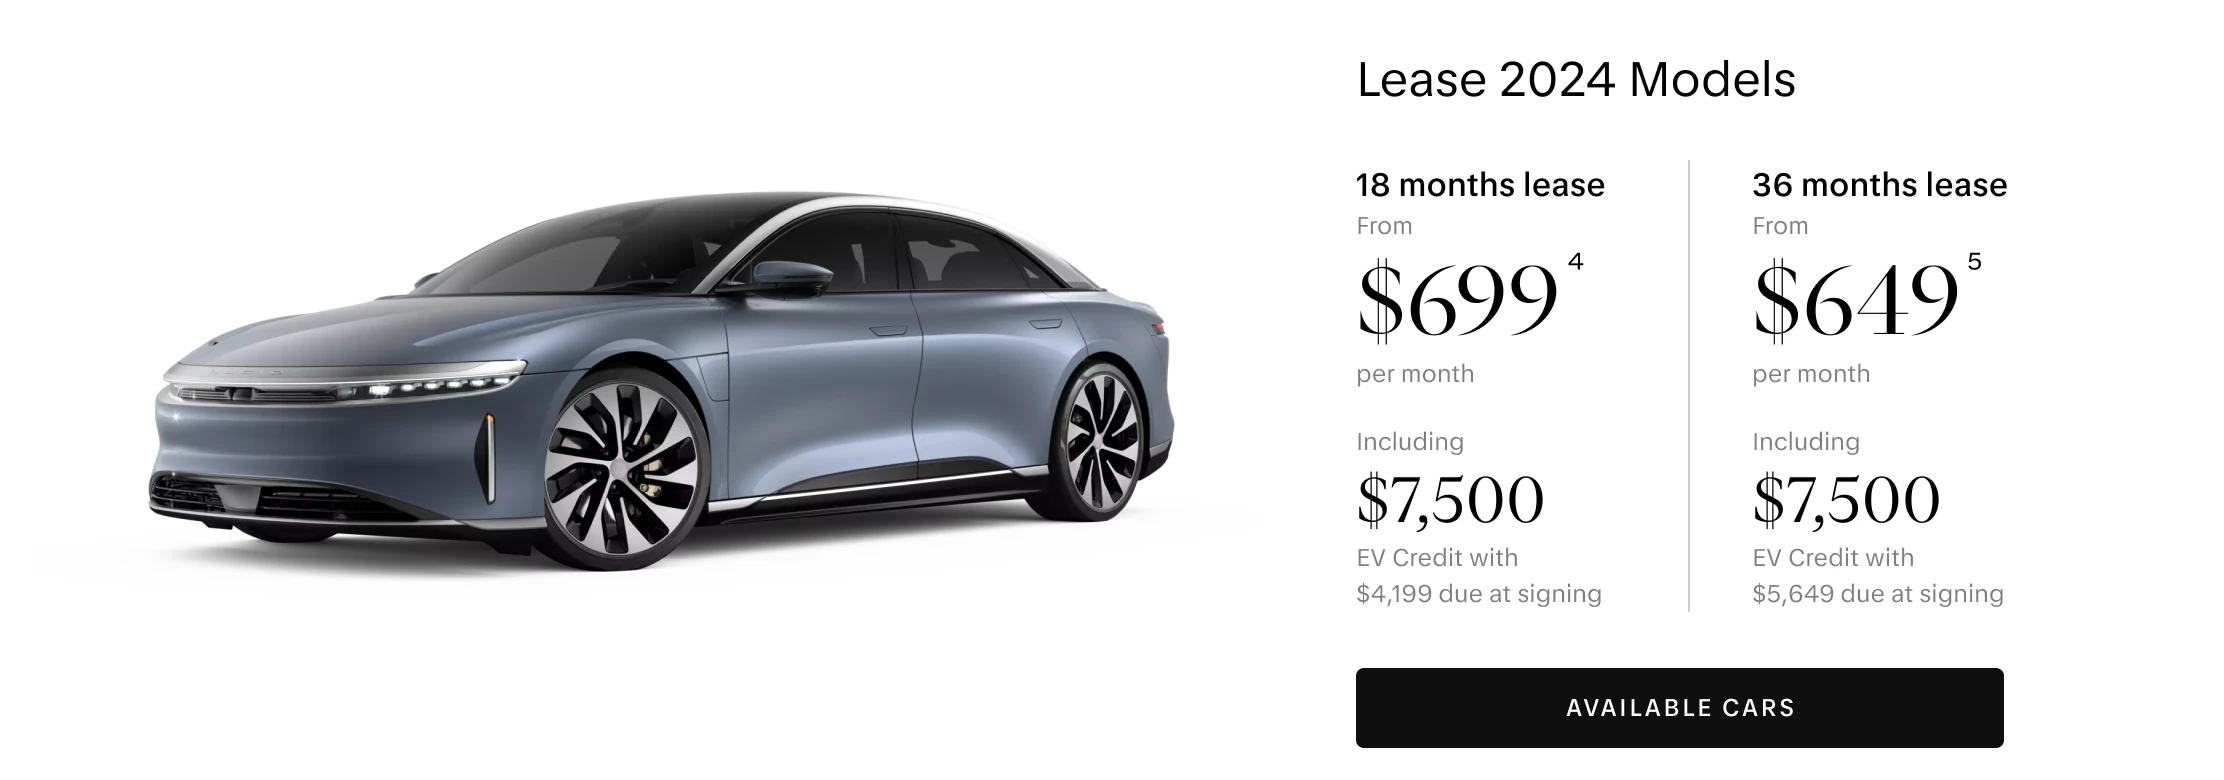 2024 Lucid Air Lease Offer